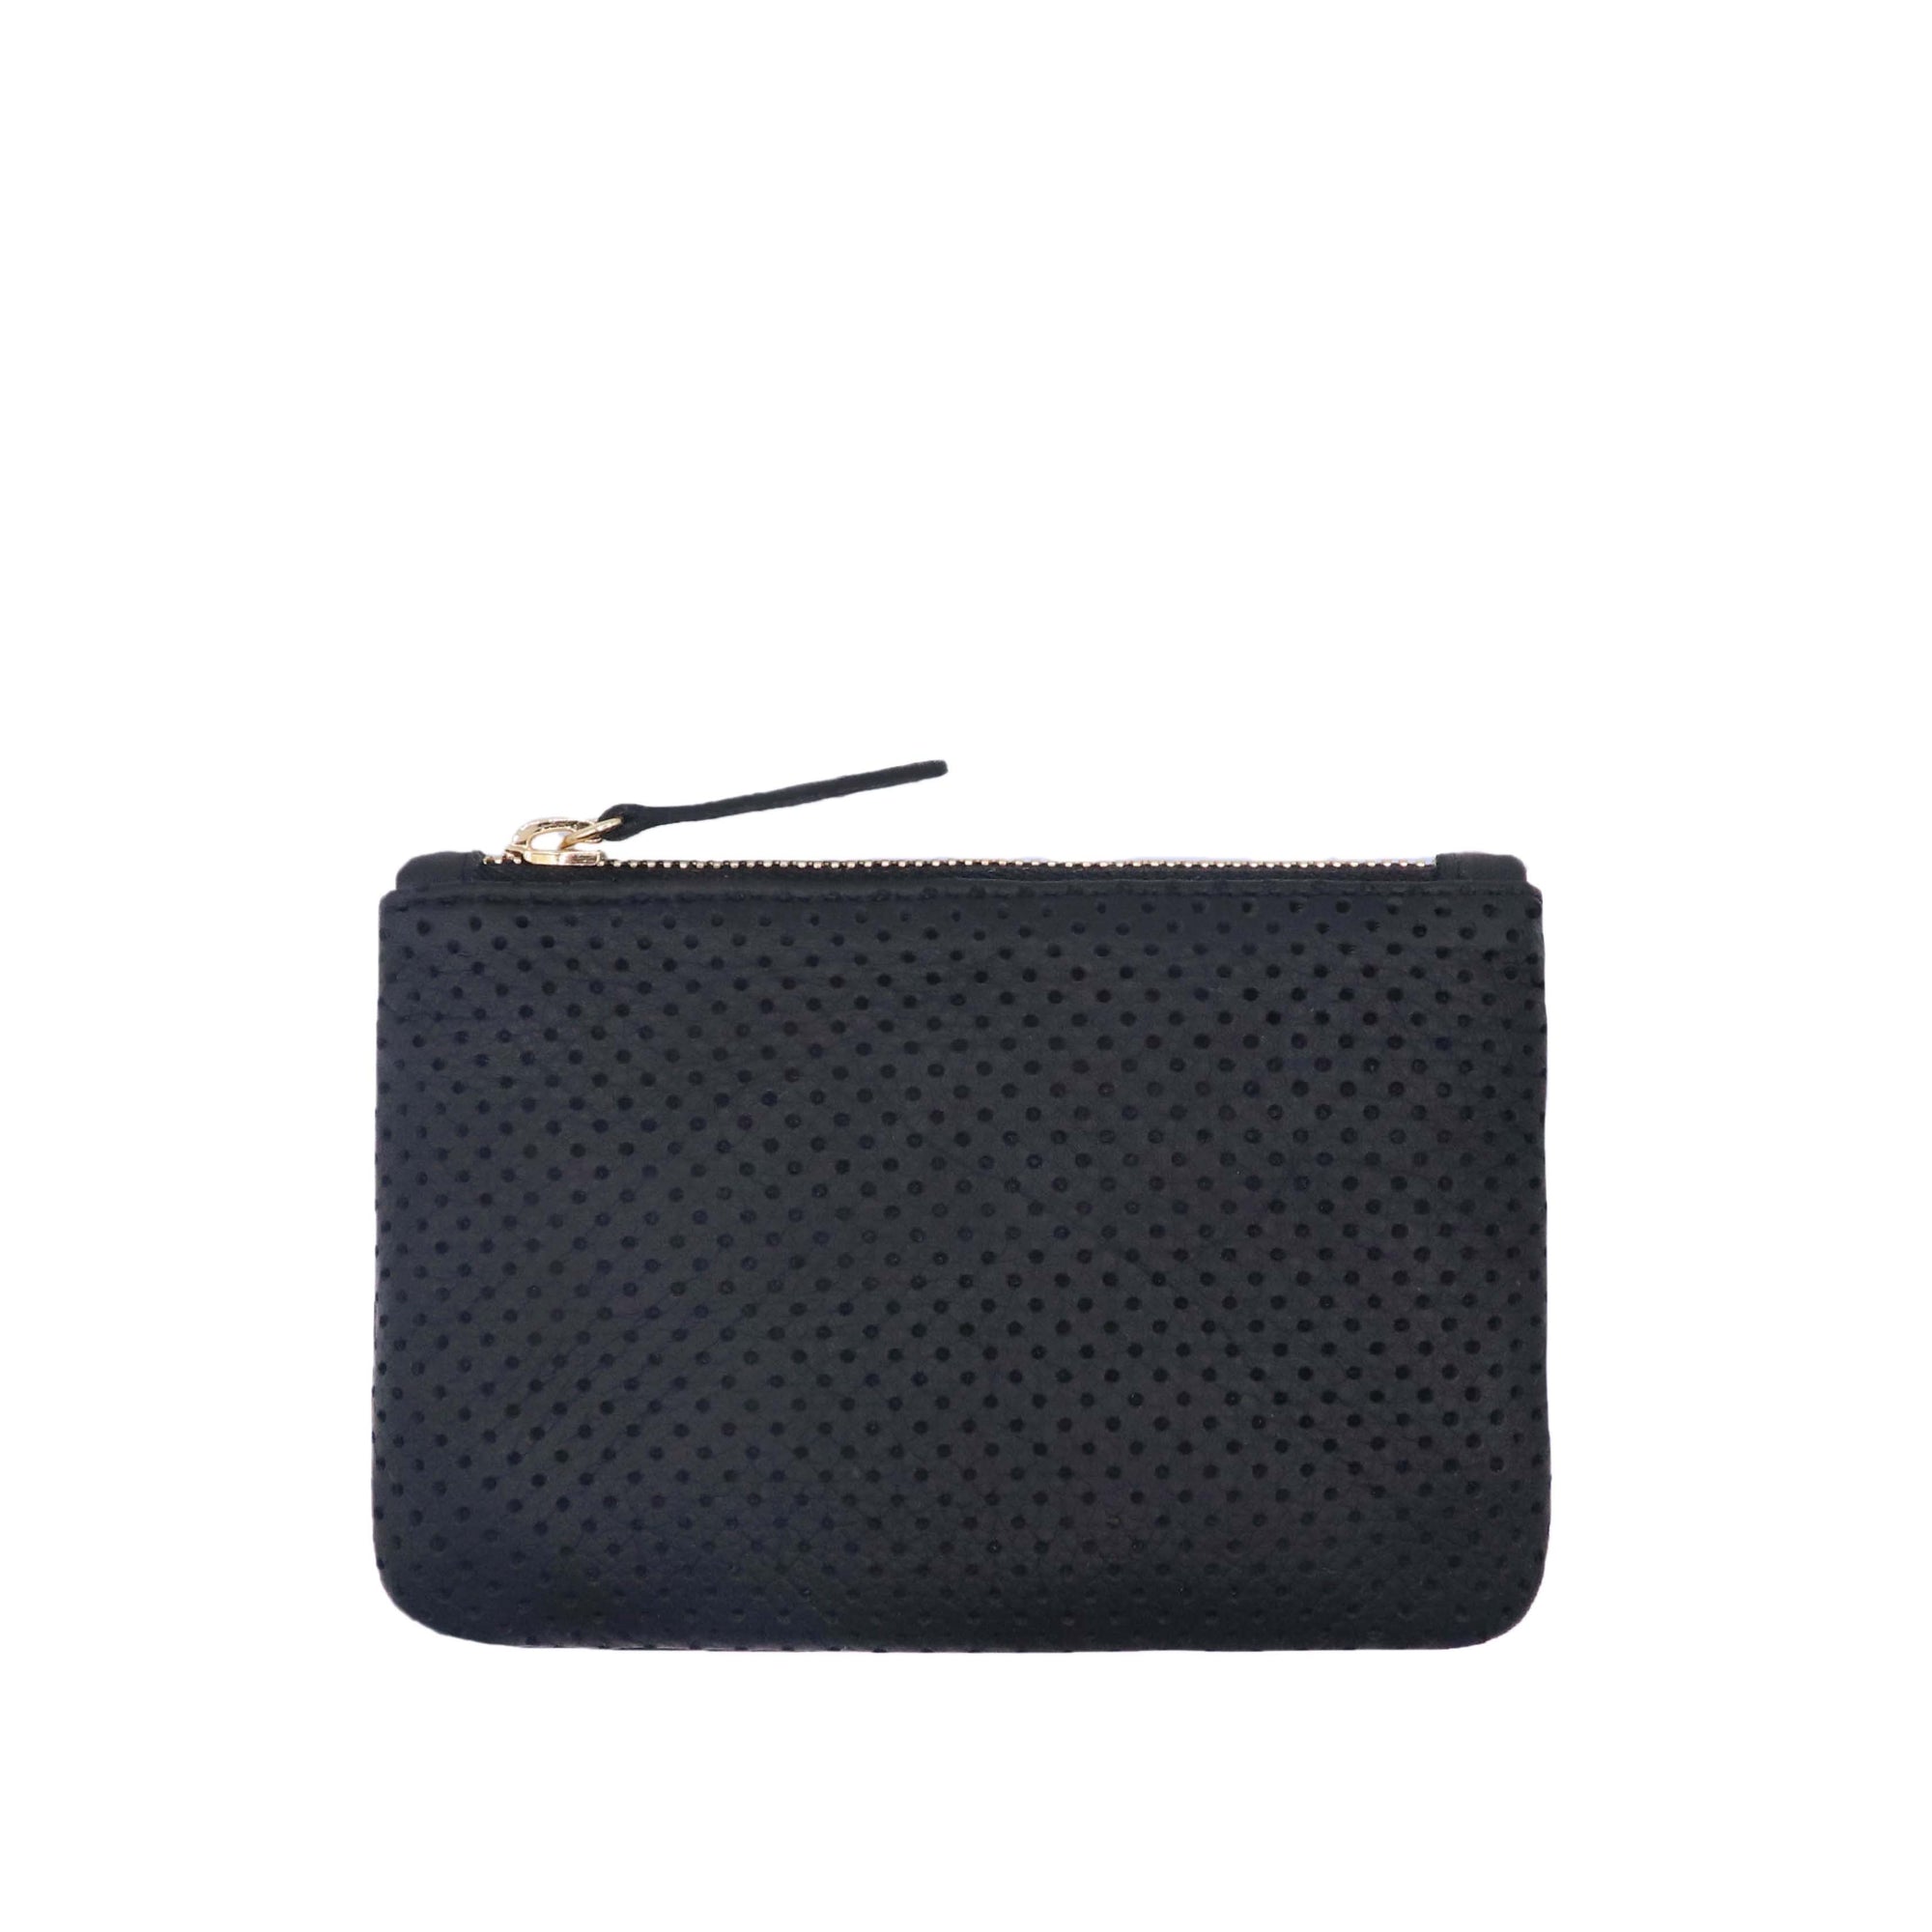 Crissy Pouch - Black Perf